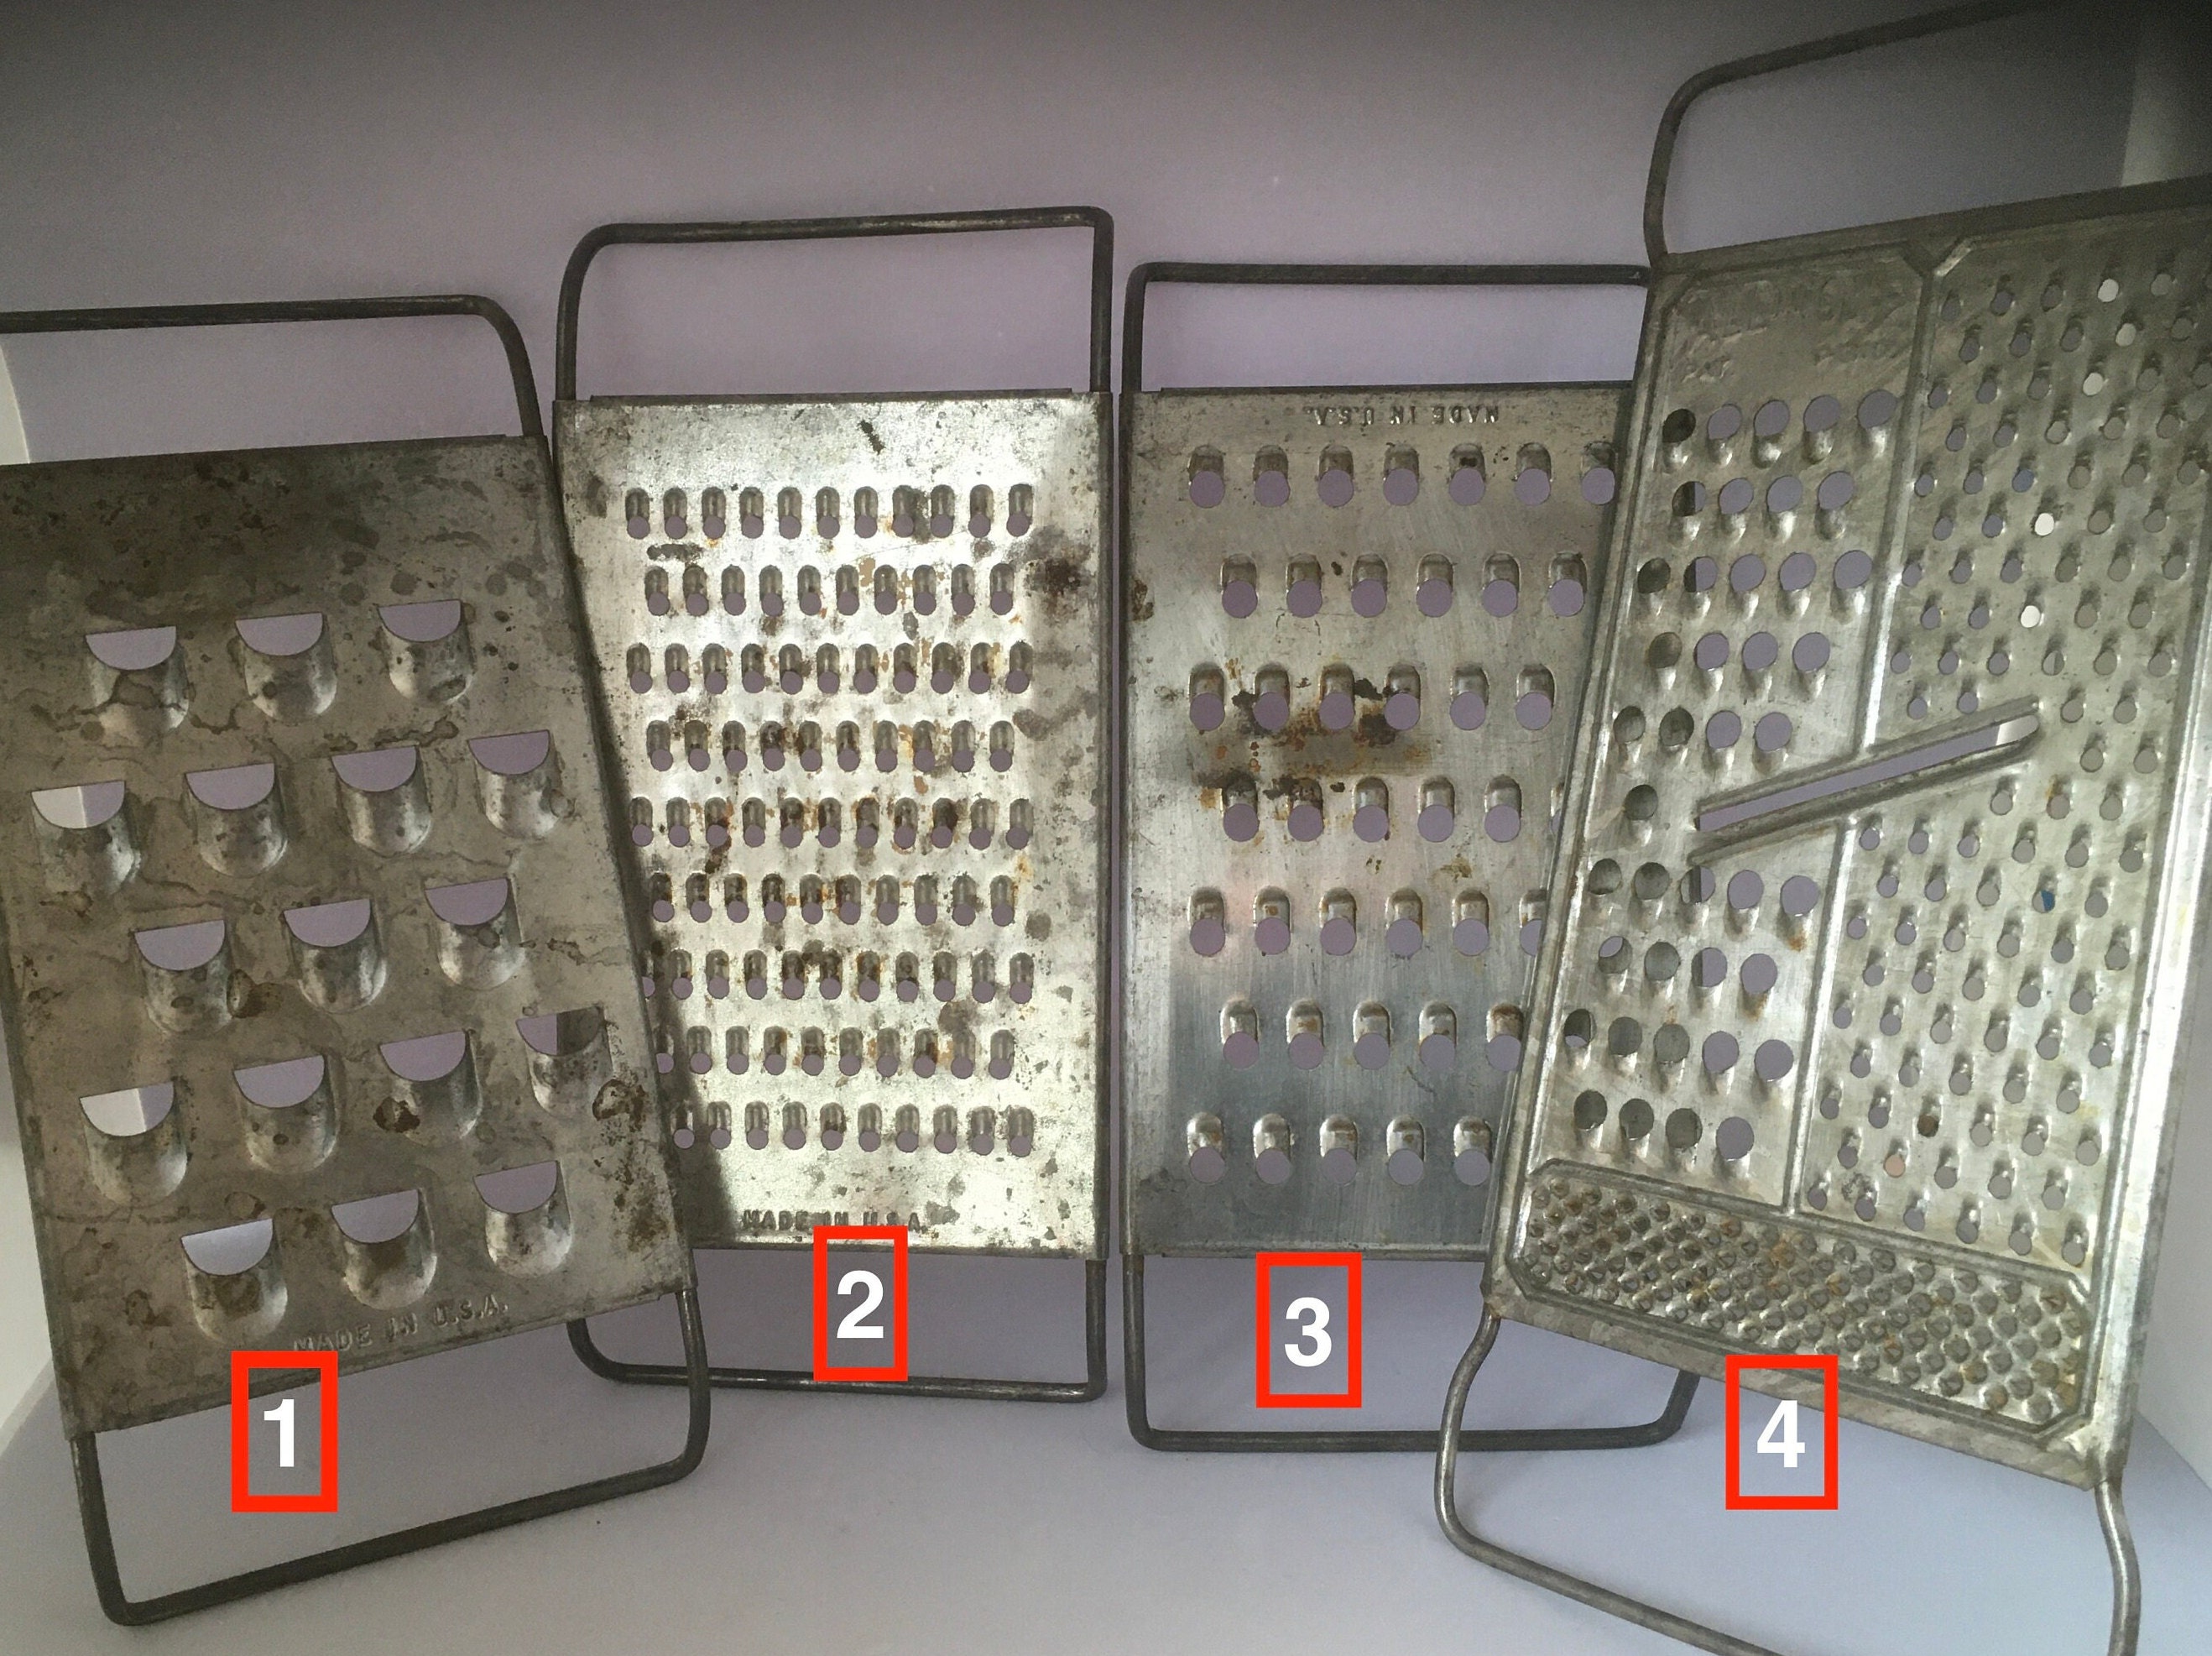 Vintage Grater, Grater Manual, Kitchen Décor, Cheese Grater